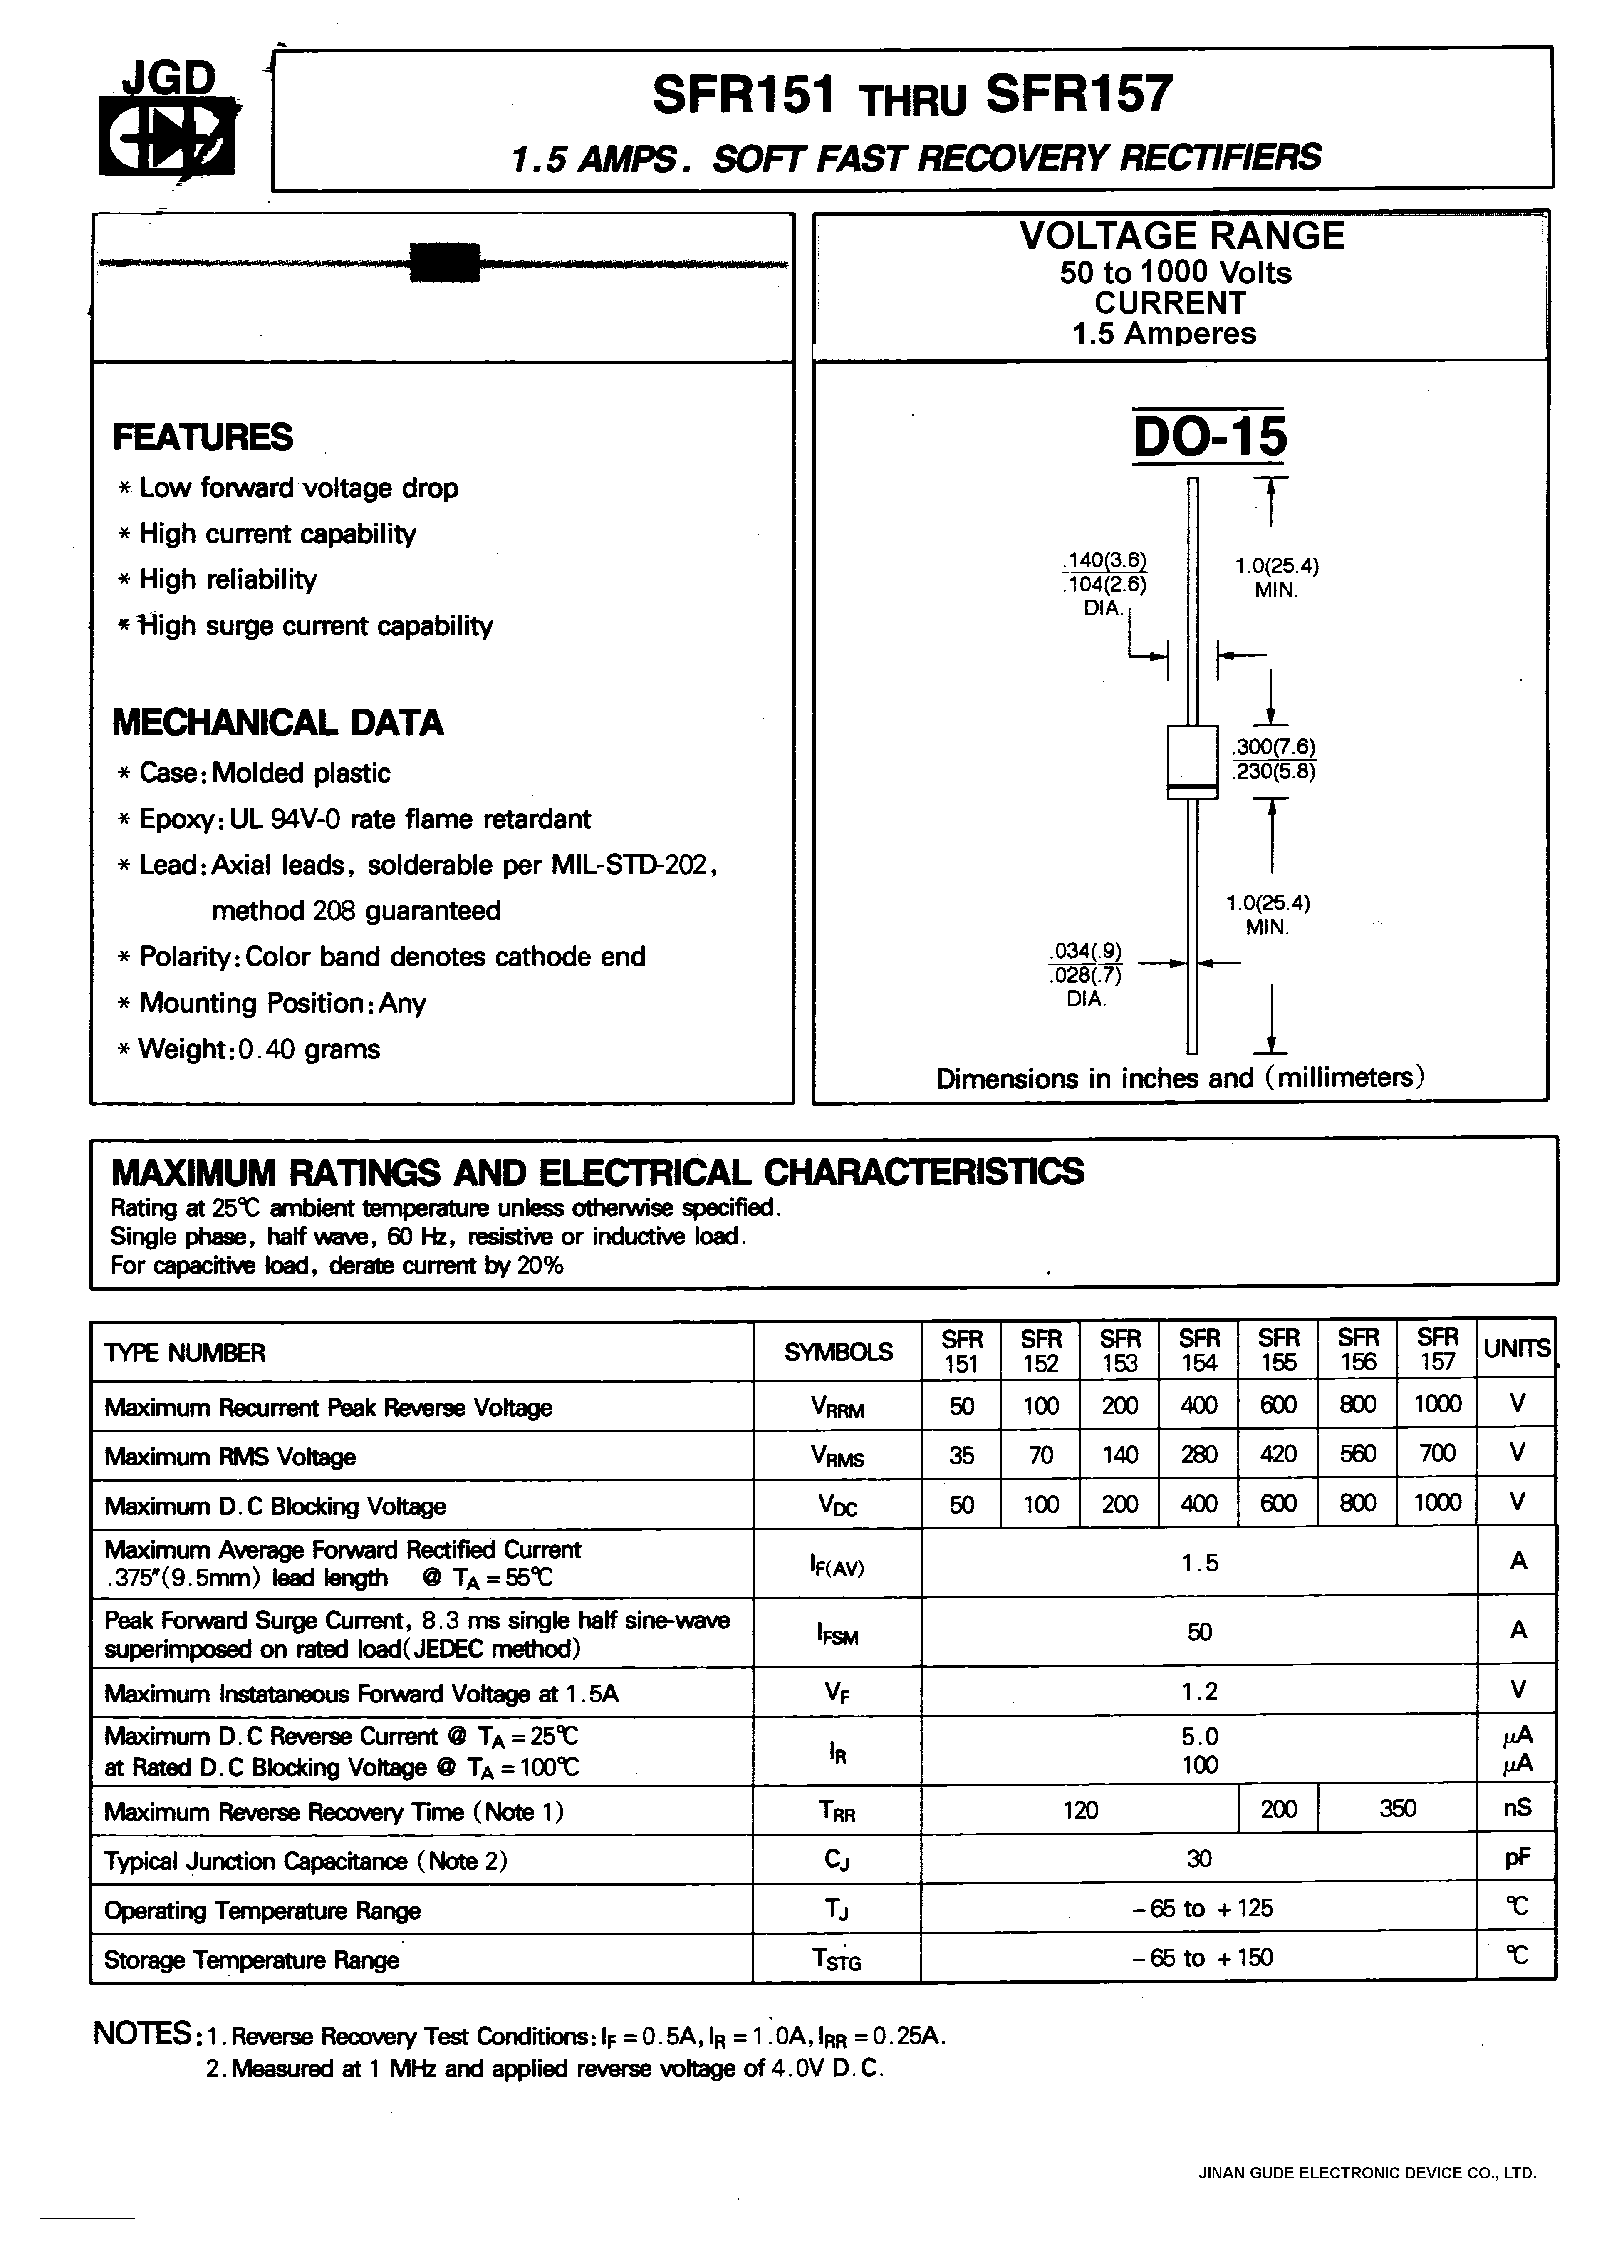 Datasheet SFR153 - 1.5 AMPS. SOFT FAST RECOVERY RECTIFIERS page 1